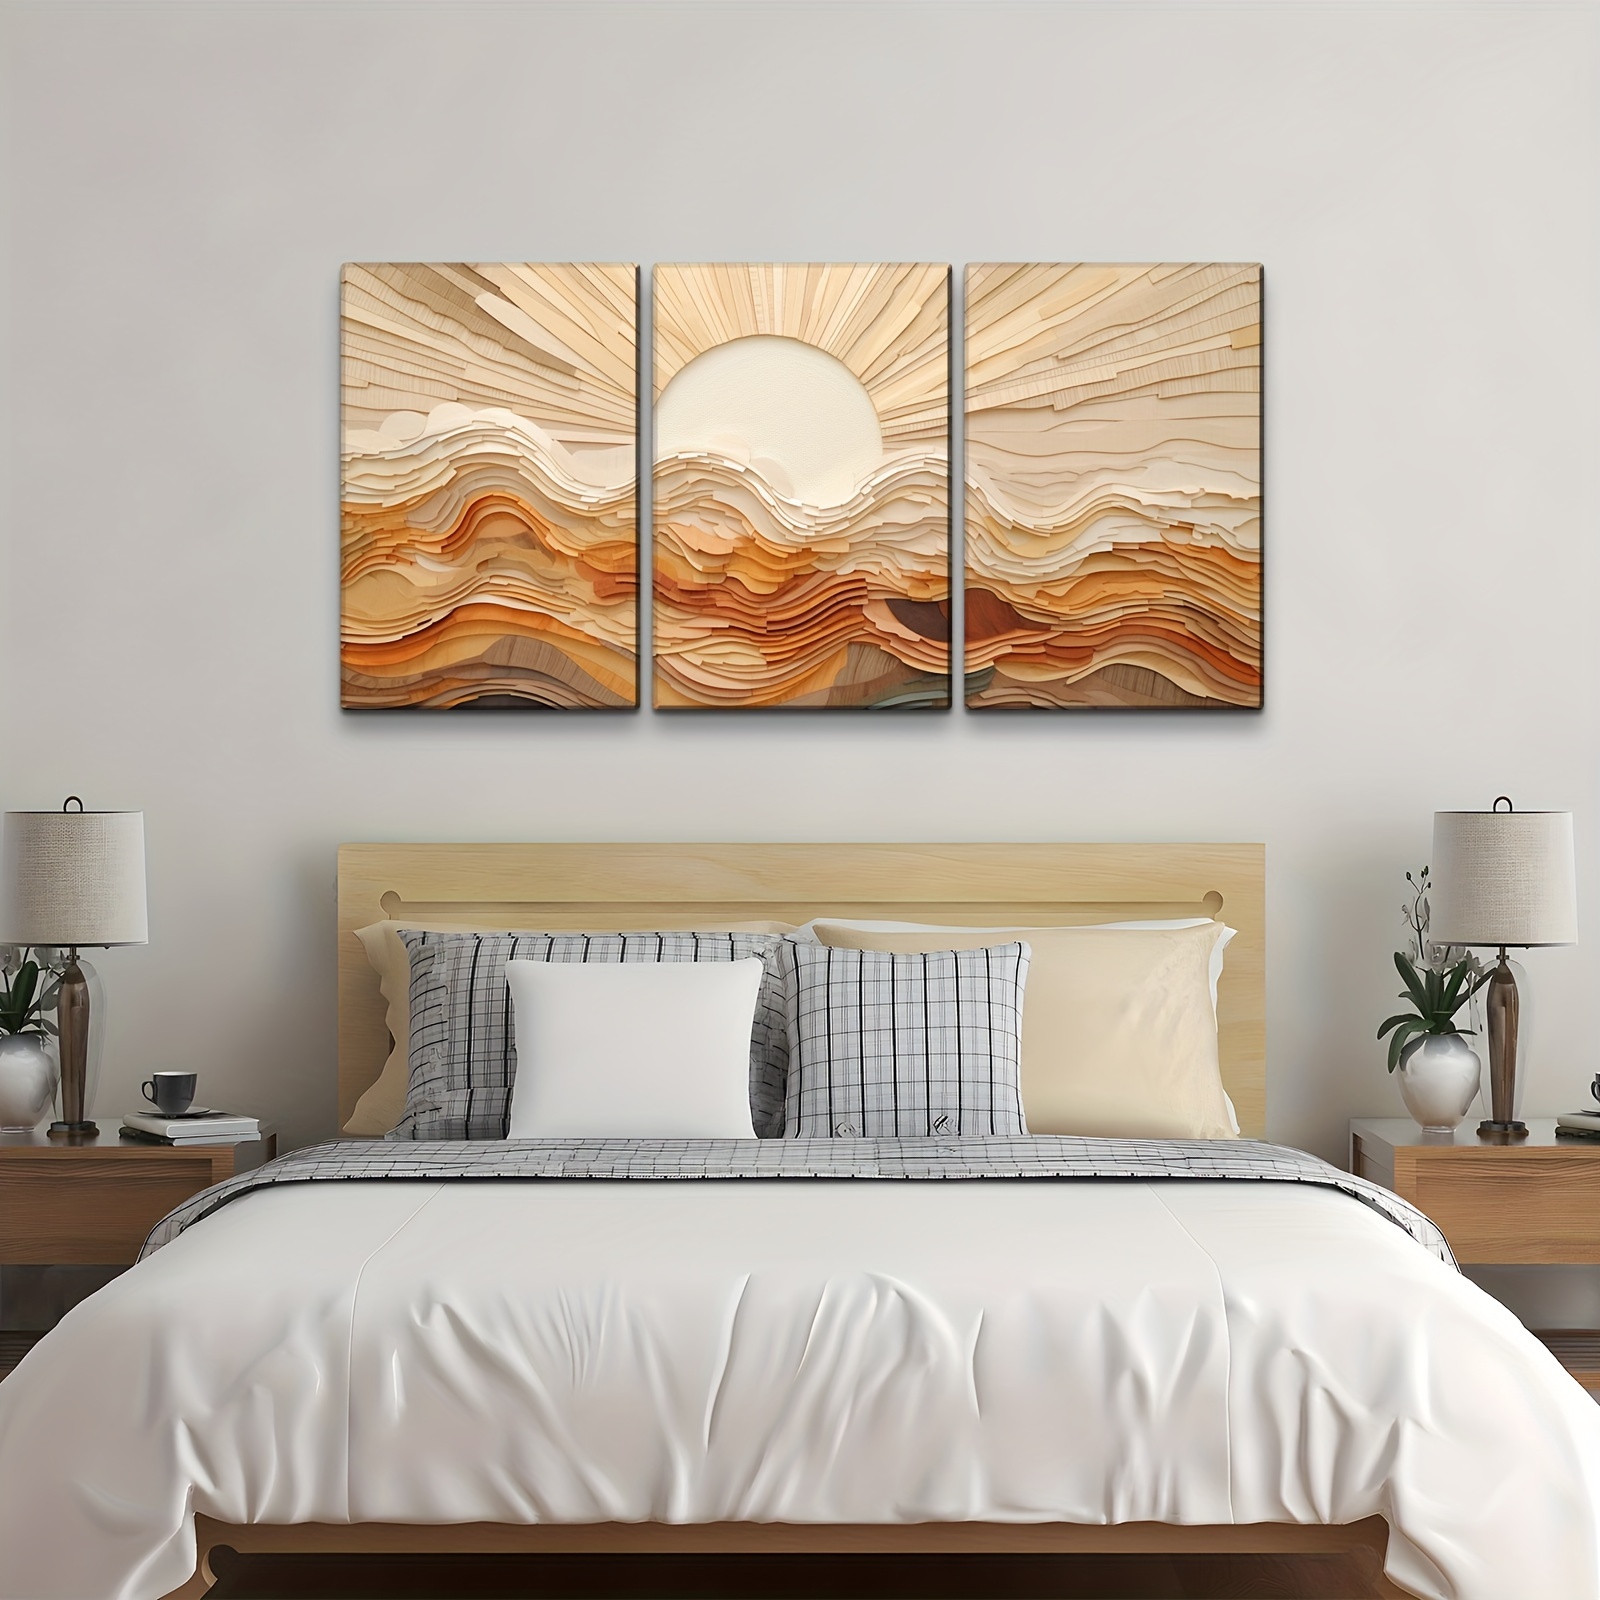 

Set Of 3 Boho Mountain Canvas Wall Art For Home Decor - Abstract Sun Mountain Forest Nature Scenery Picture Print On Canvas, Bohemian Paintings For Wall Hd Giclee Ready To Hang